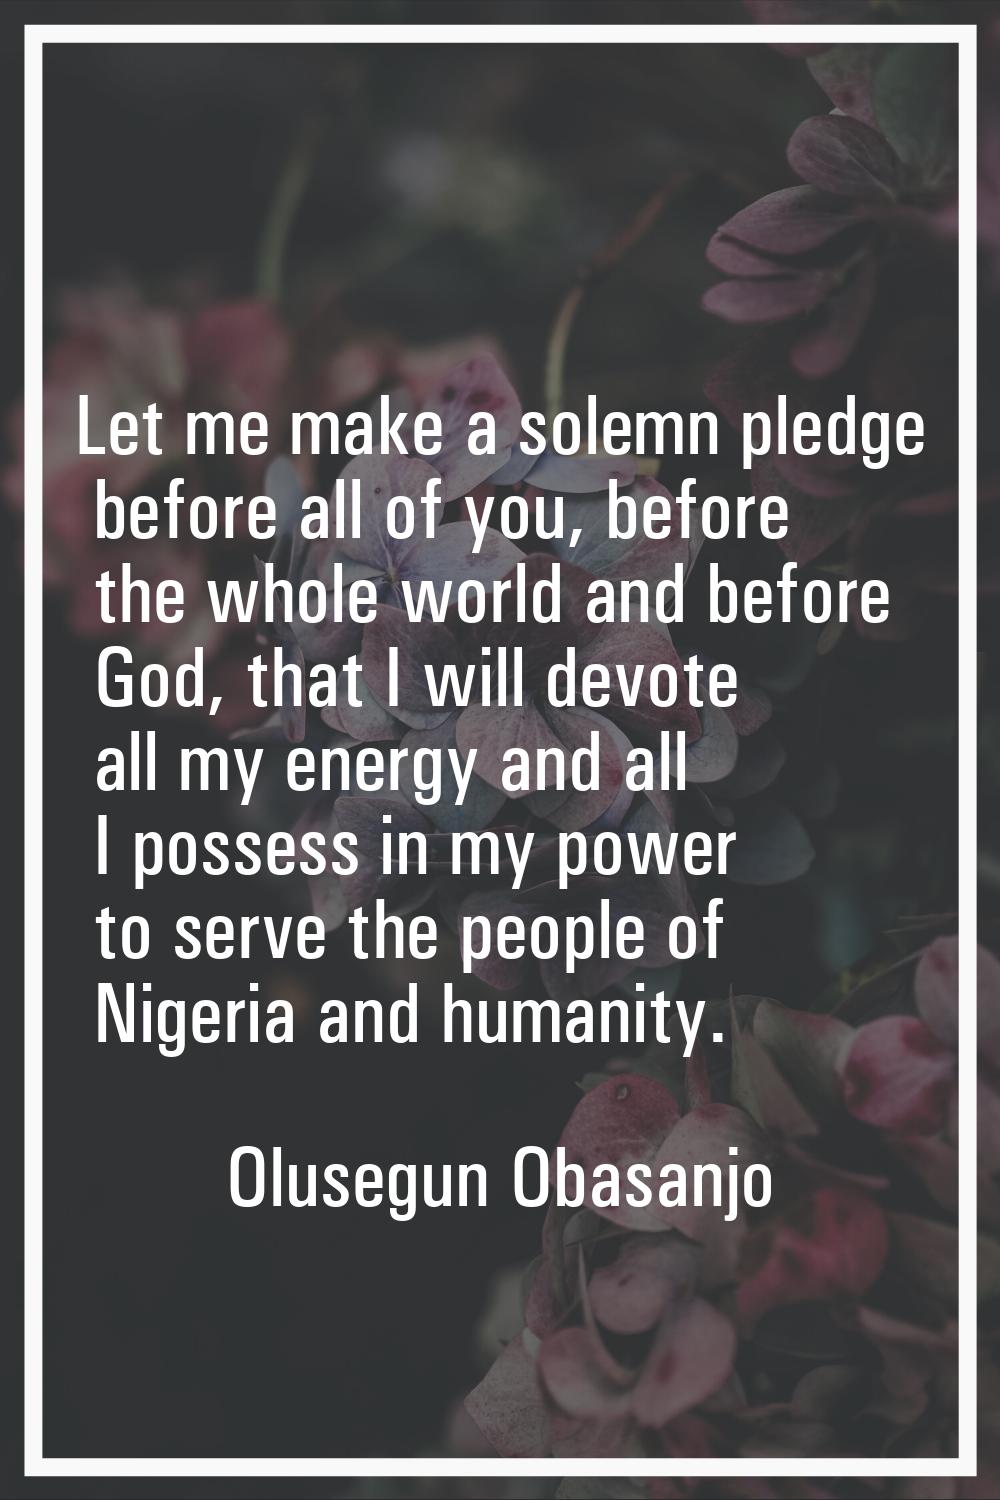 Let me make a solemn pledge before all of you, before the whole world and before God, that I will d